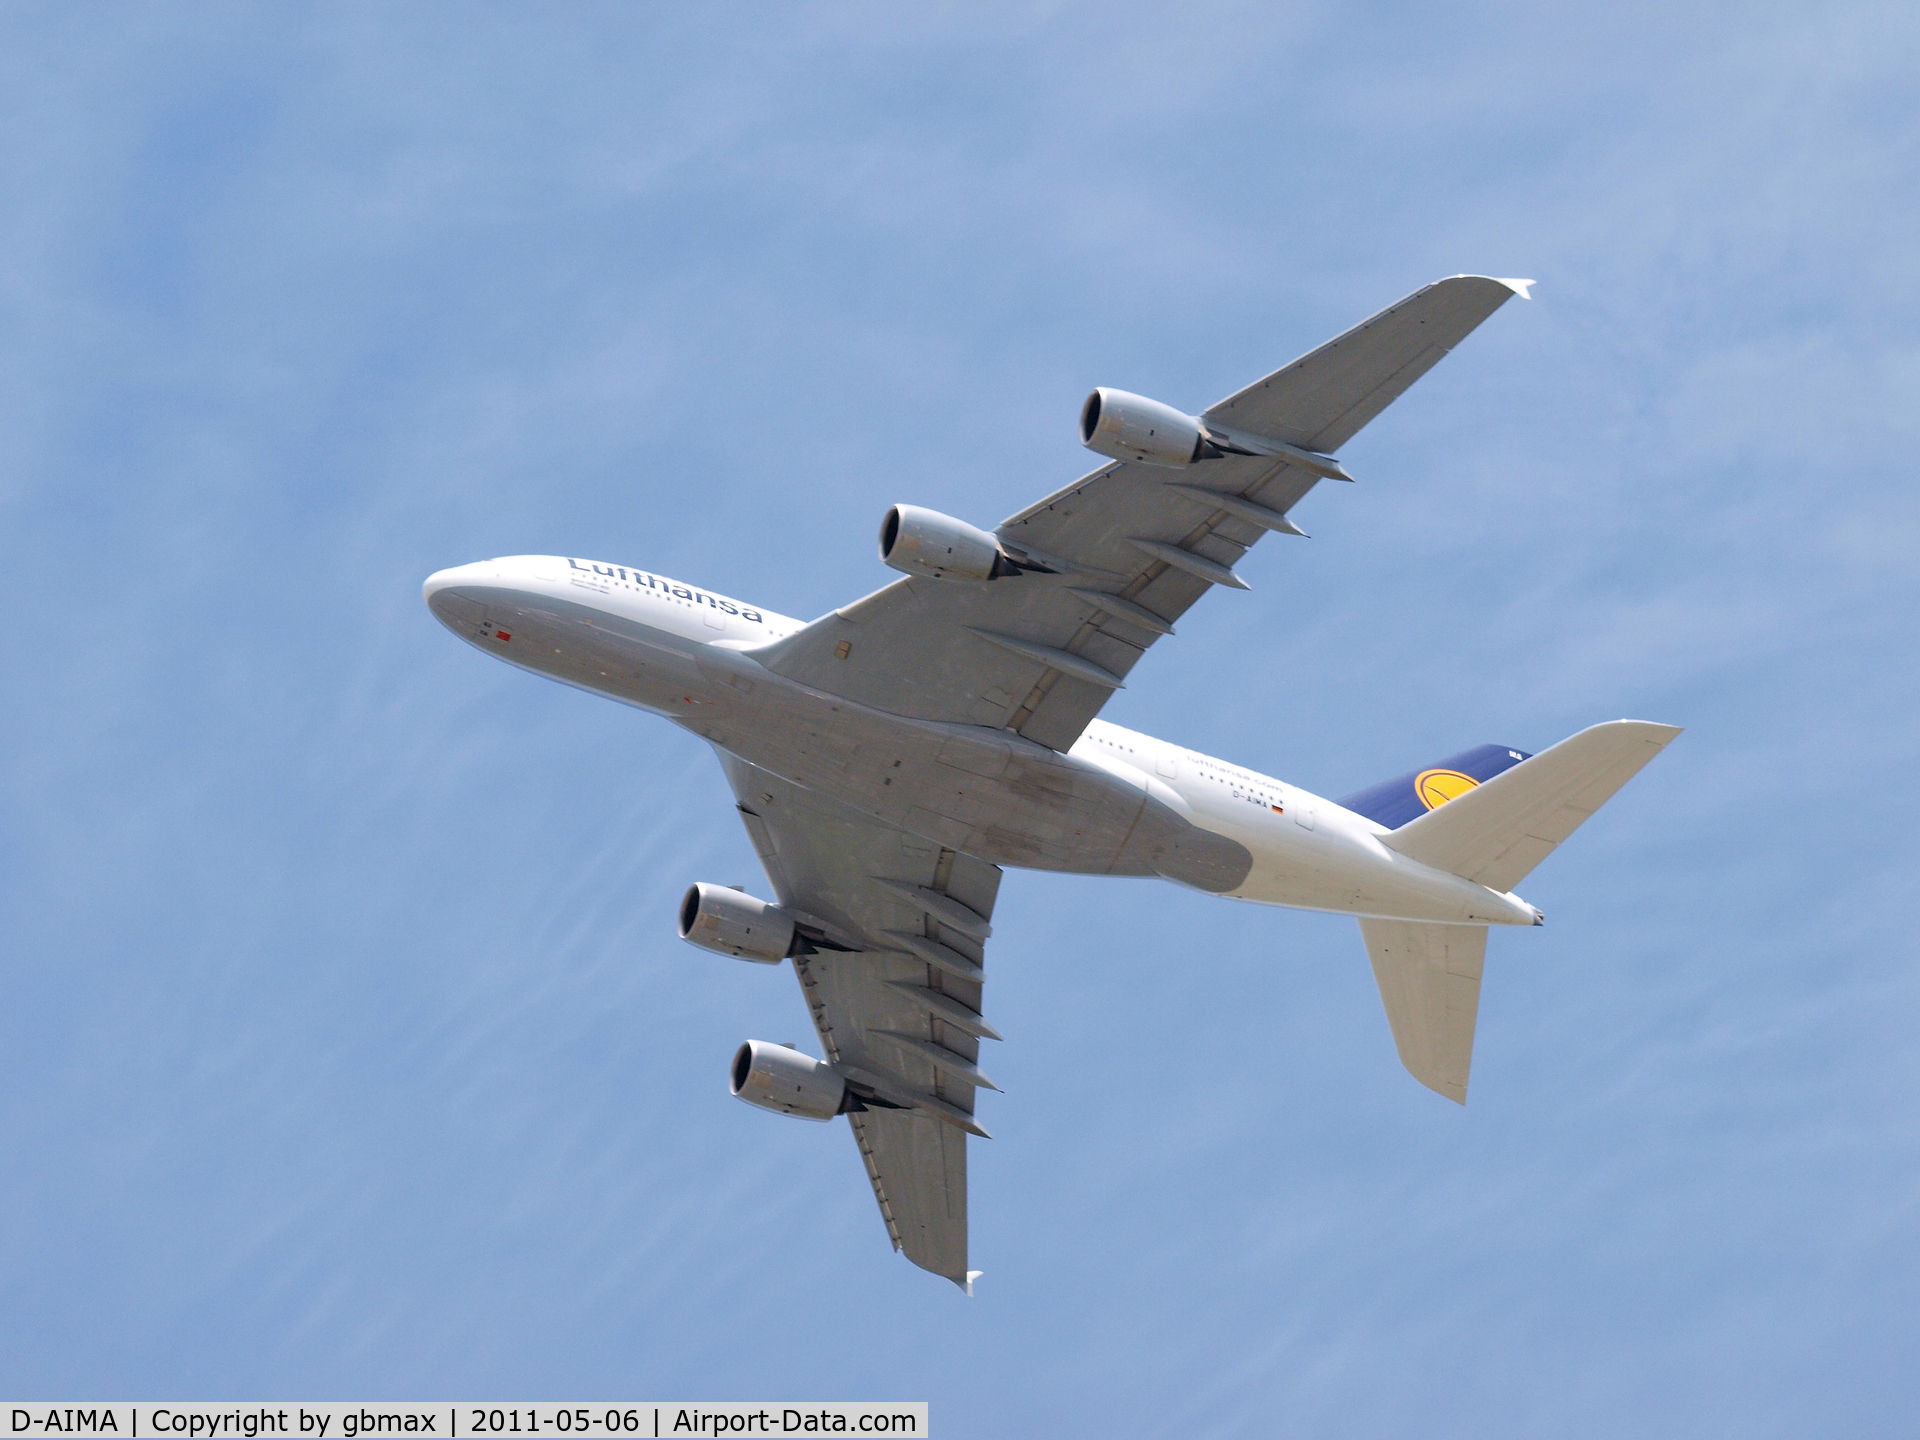 D-AIMA, 2010 Airbus A380-841 C/N 038, Flying over Mineola, NY, going to a landing at JFK